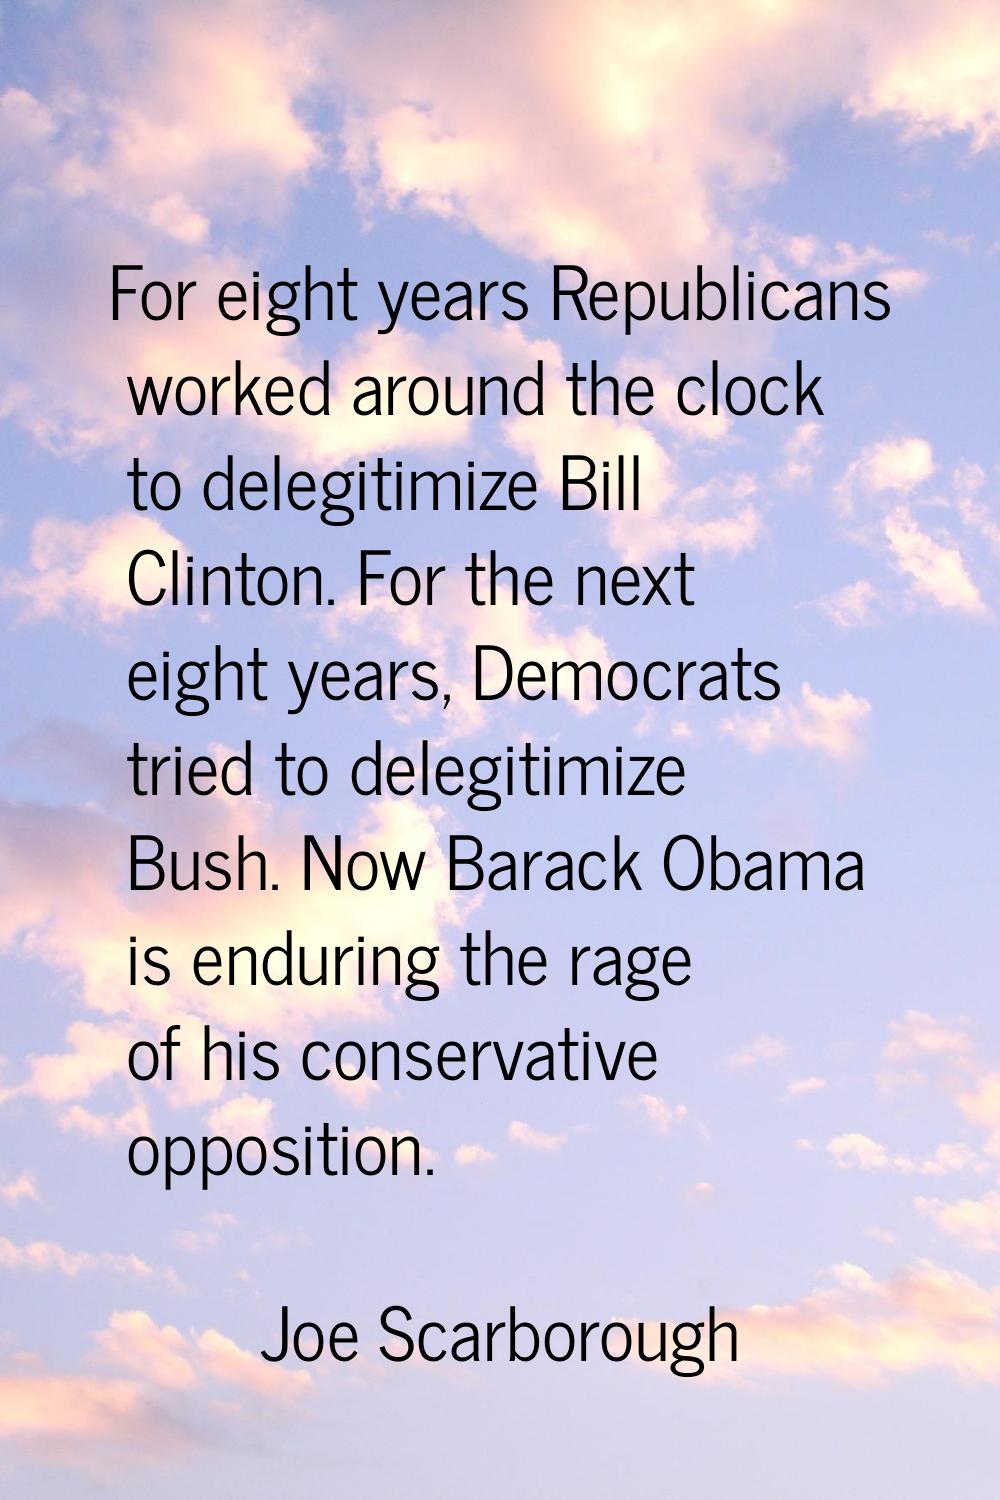 For eight years Republicans worked around the clock to delegitimize Bill Clinton. For the next eigh